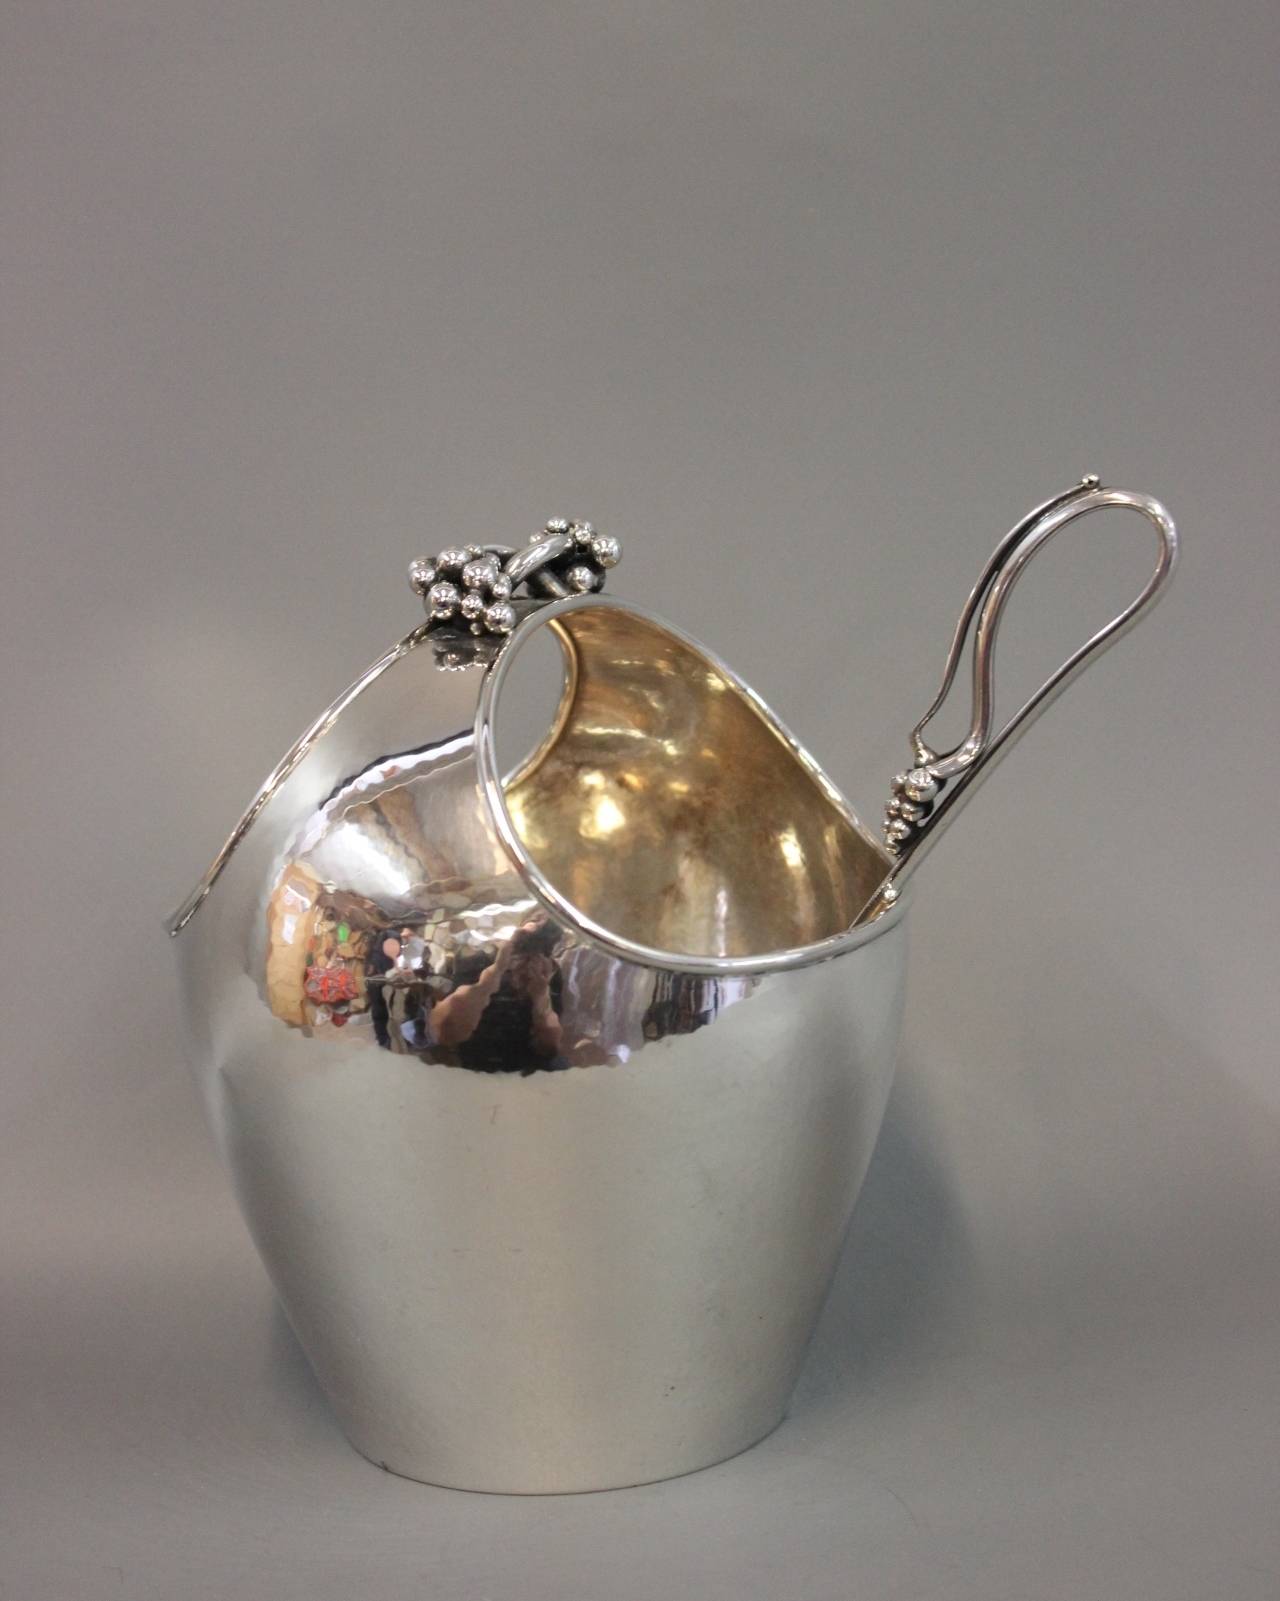 Scandinavian Modern Silver Ice Bowl with Spoon, Stamped 835s, c. 1940